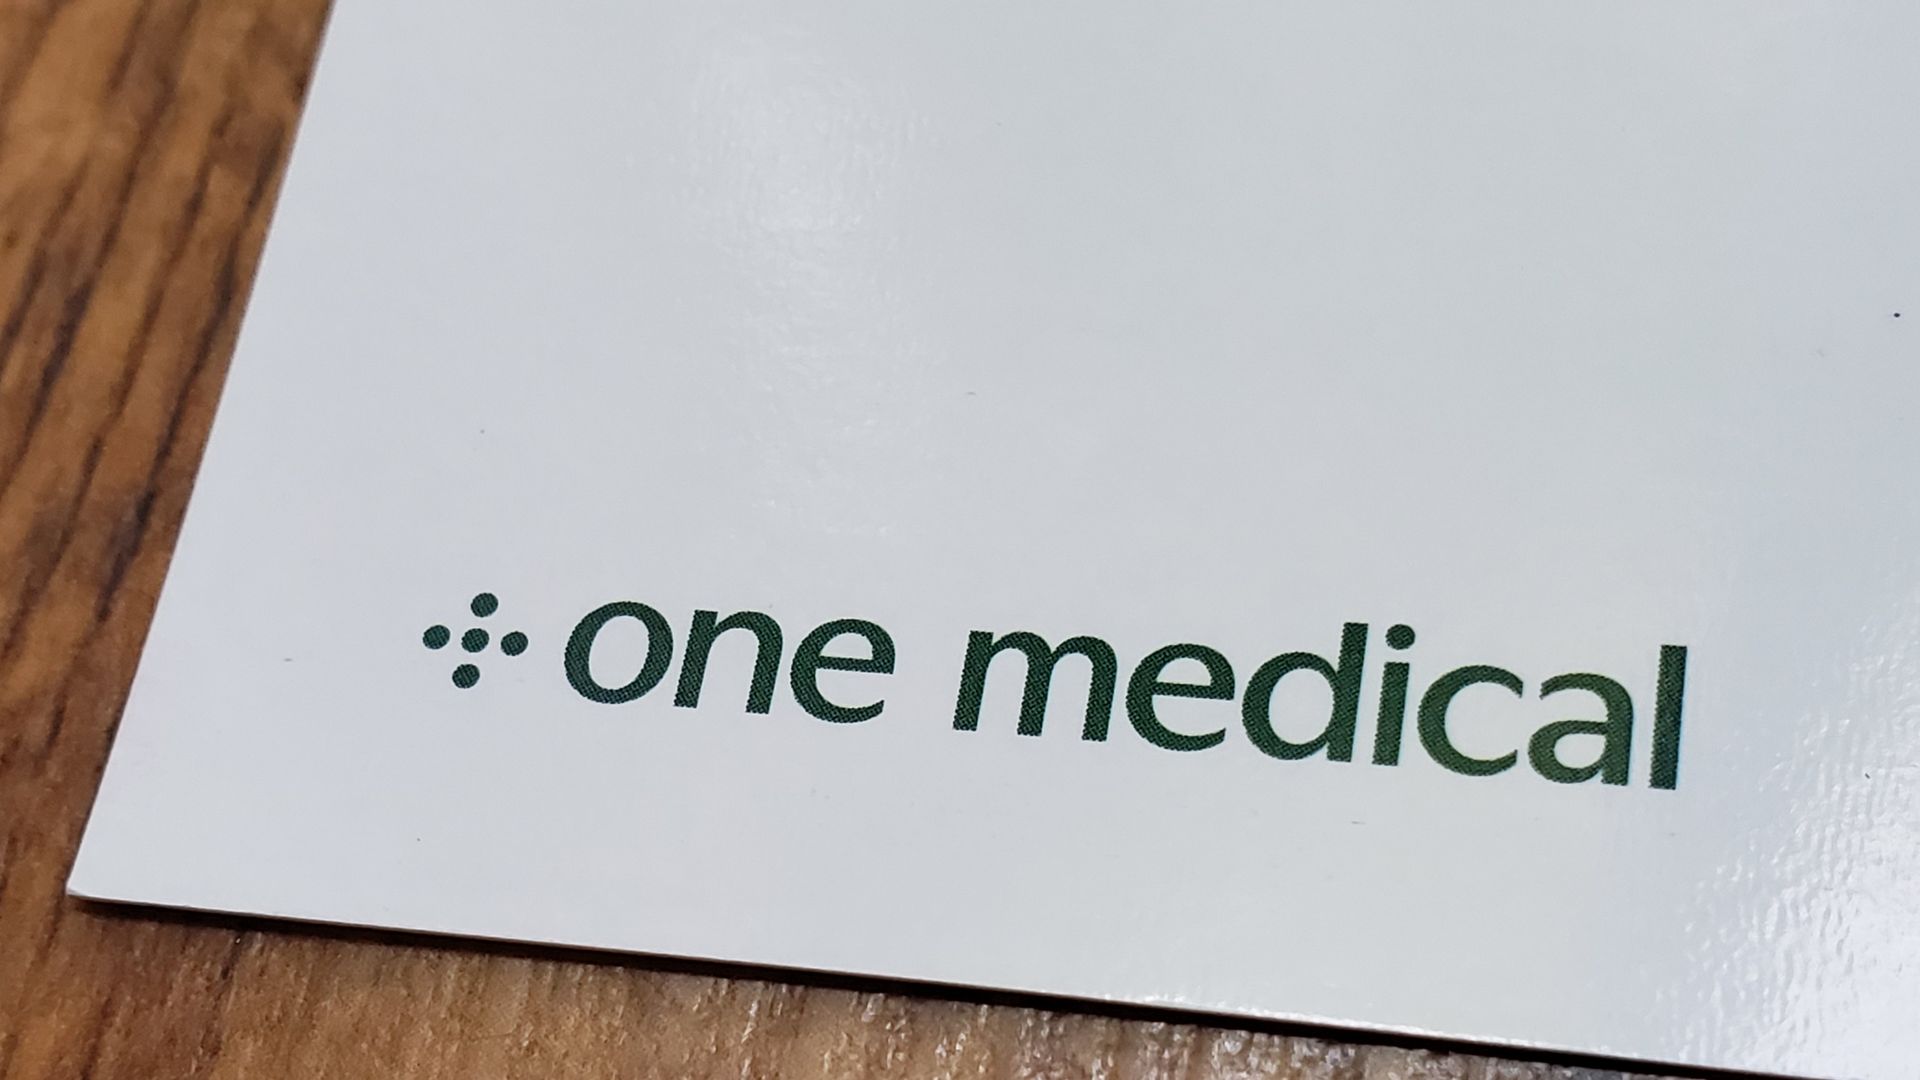 The green logo of One Medical on a white background.